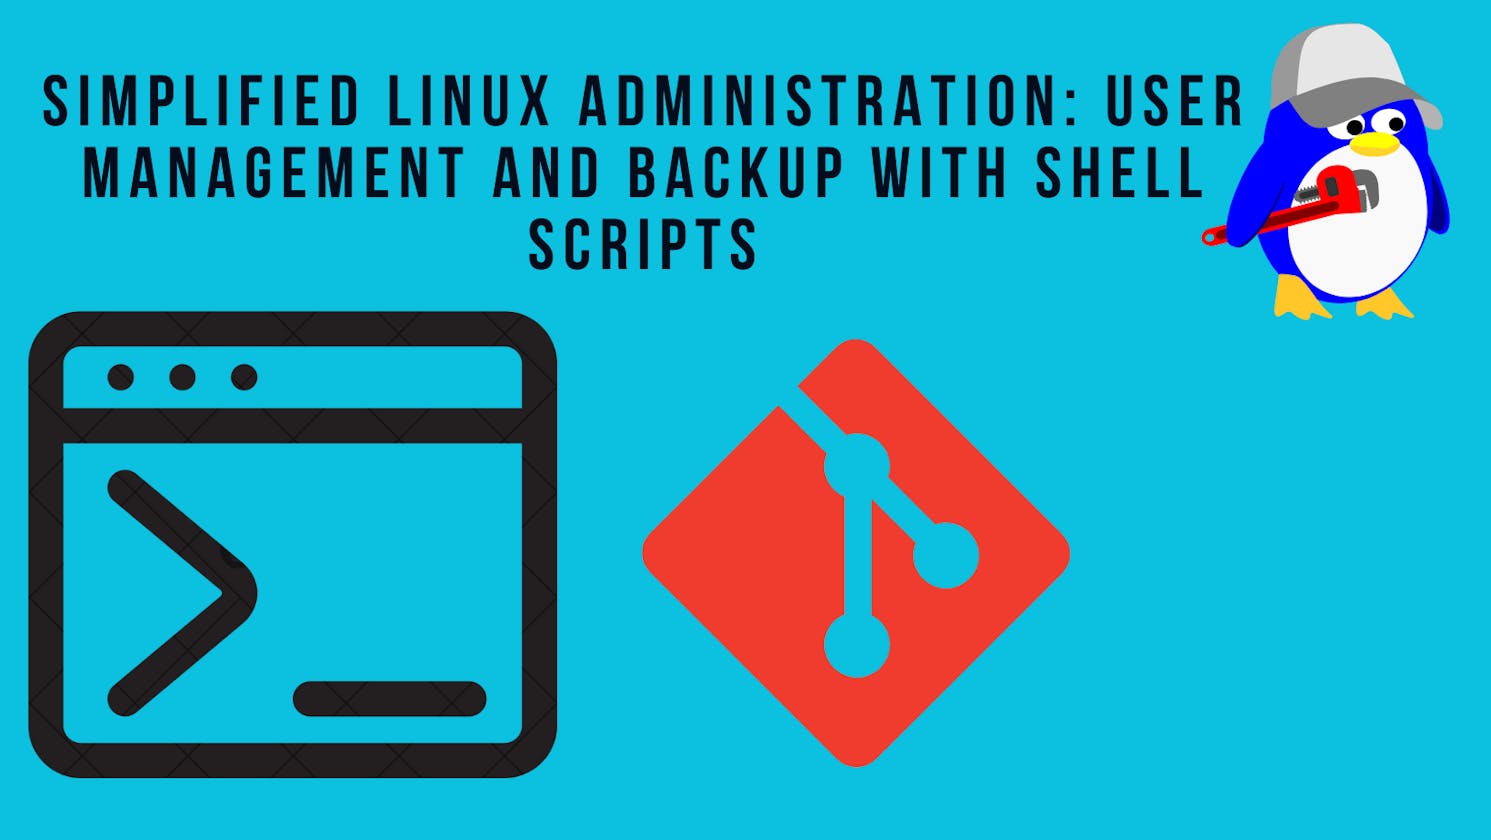 Project 1: Simplified Linux Administration: User Management and Backup with Shell Scripts 🚀